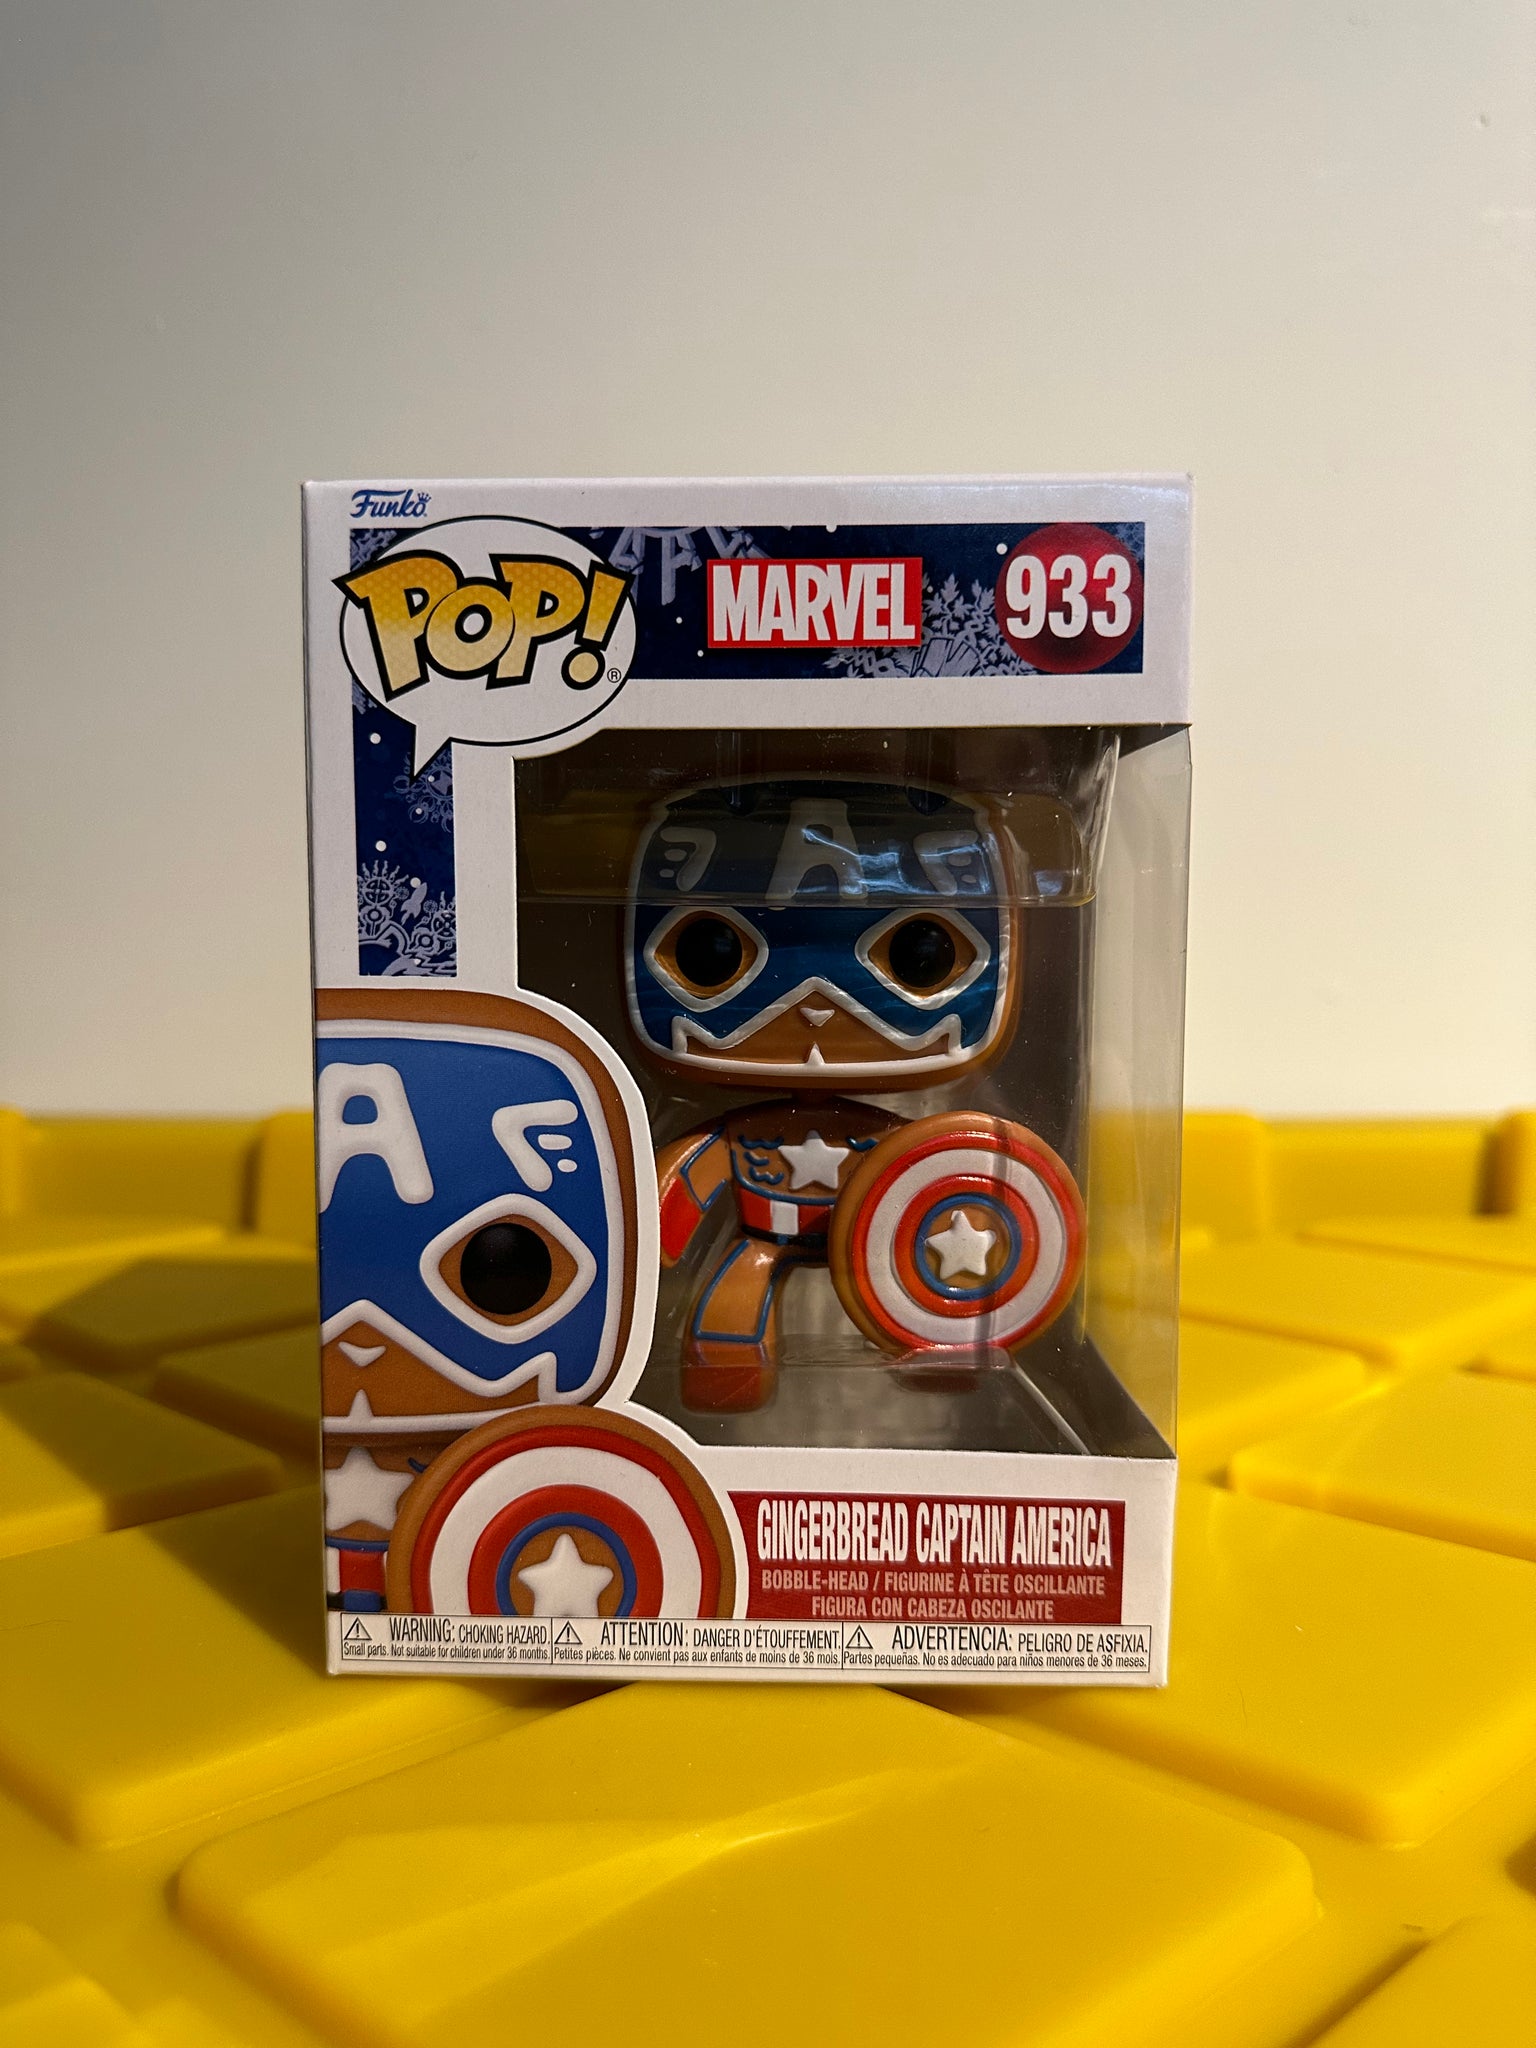 Gingerbread Captain America – Black Panther Collectables